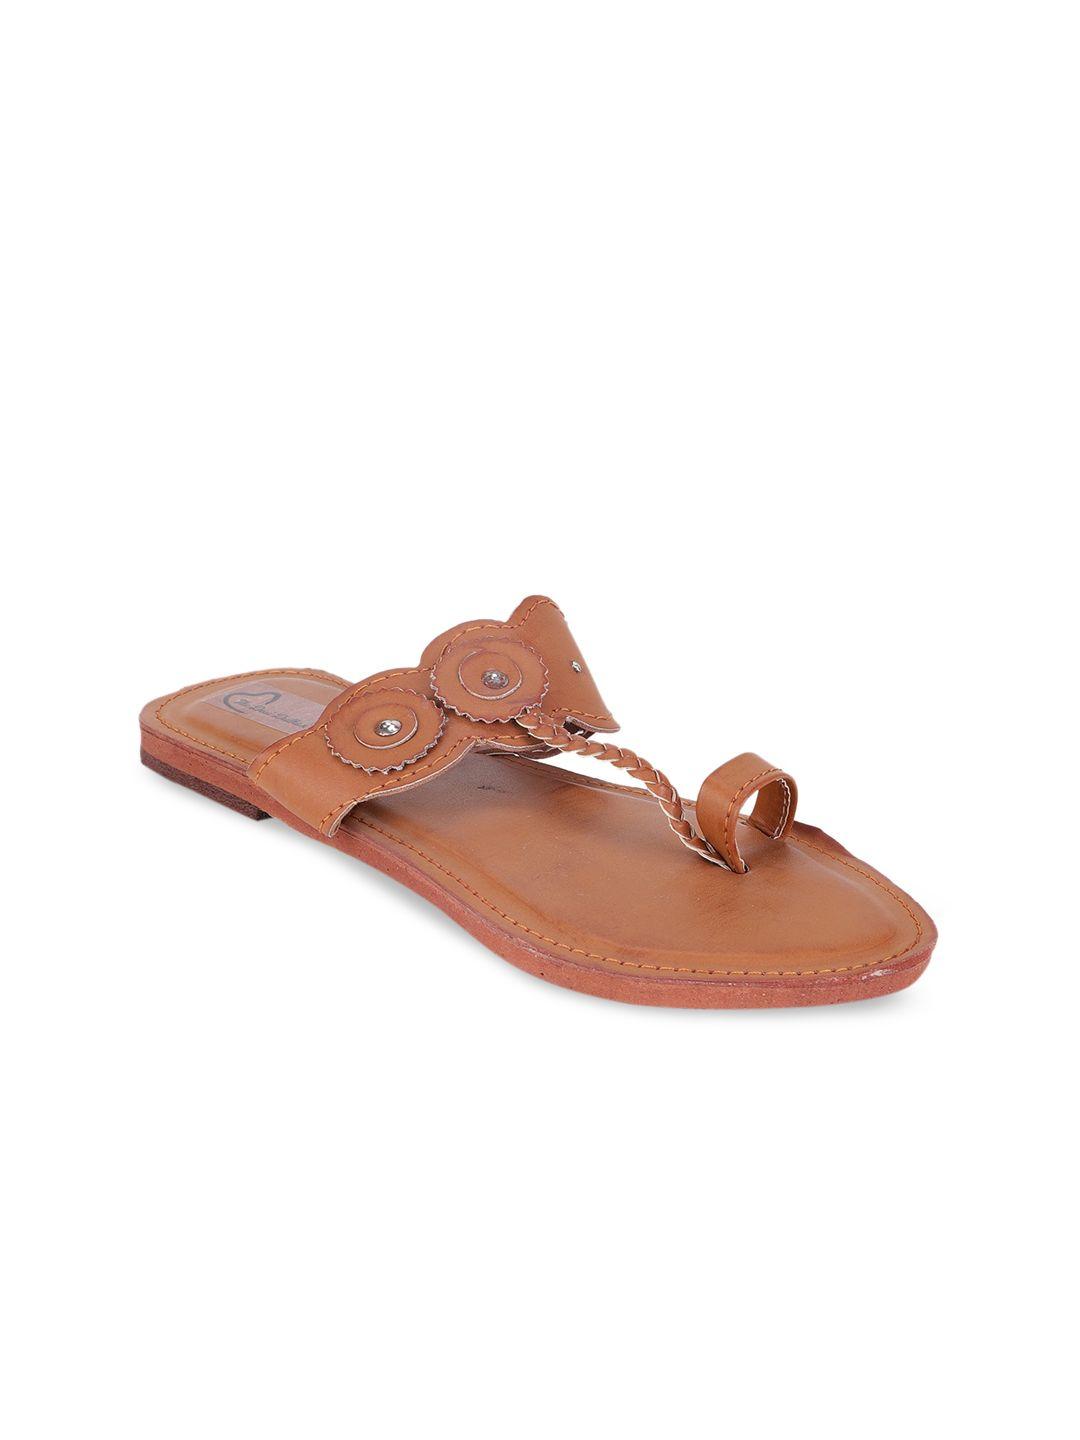 The Desi Dulhan Women Tan Textured Leather Ethnic Flats